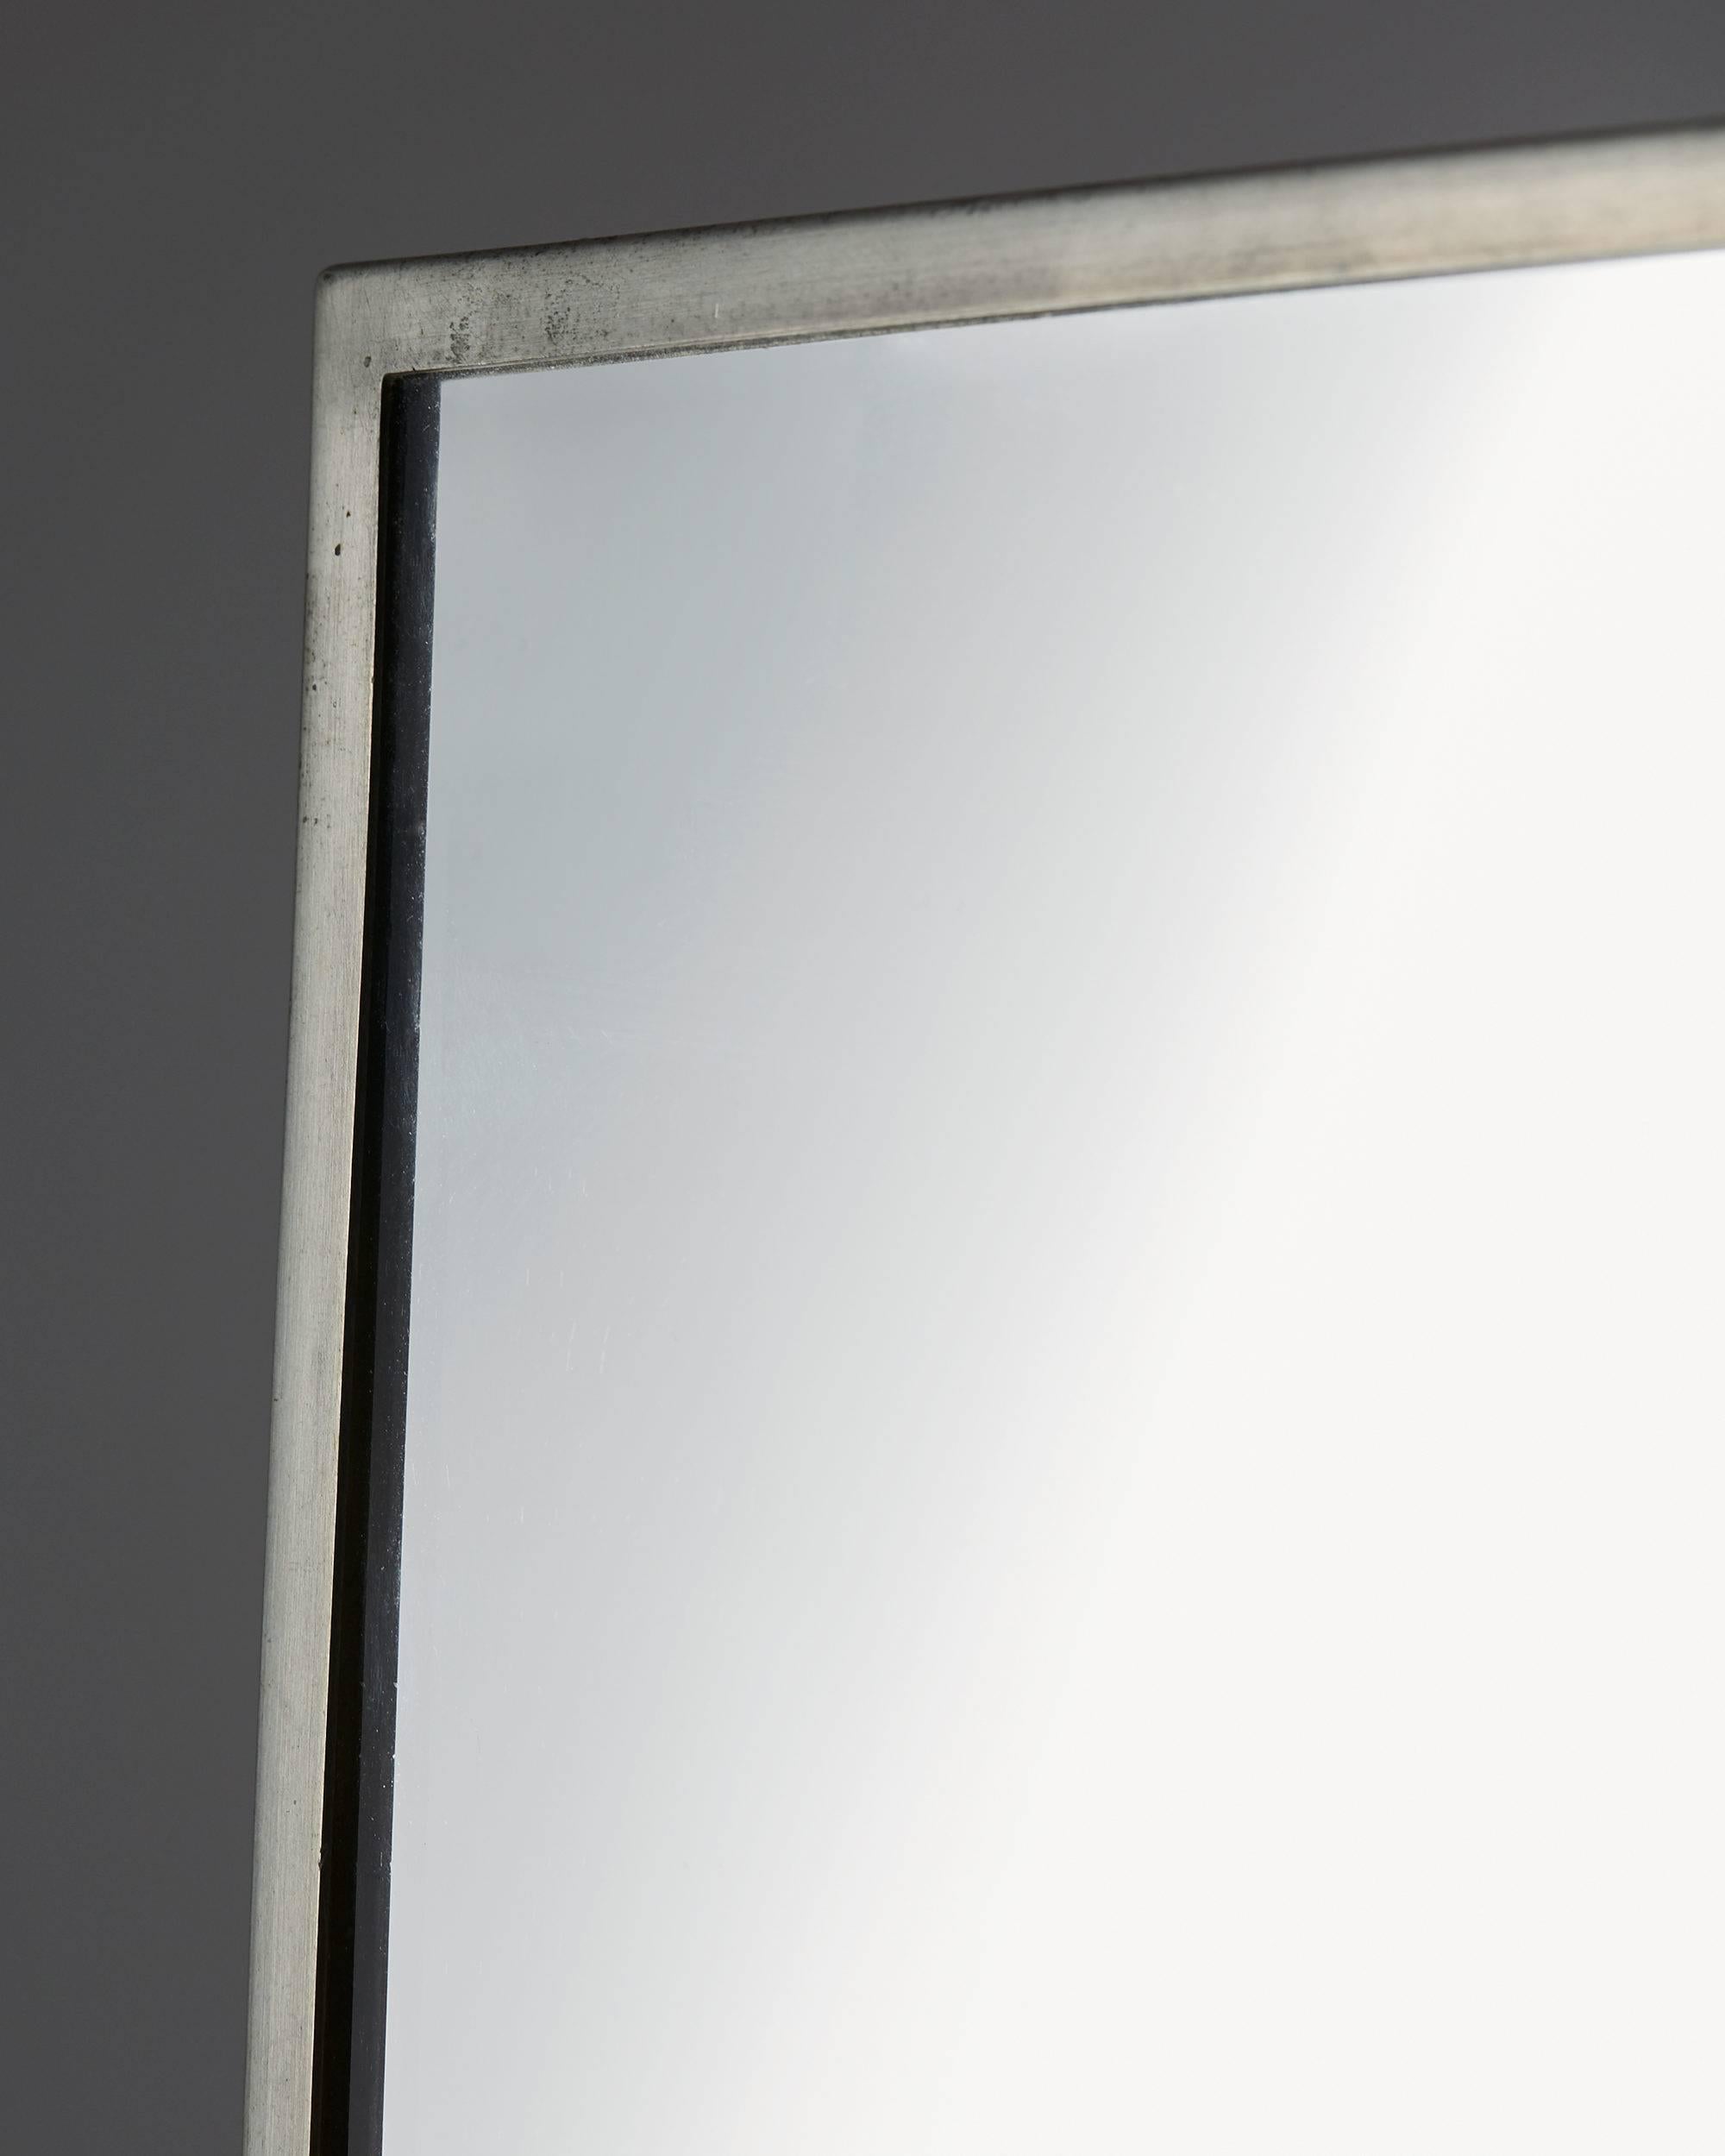 Mirror, anonymous,
Sweden, 1930s.

Pewter and mirrored glass.

Measurements: 
H: 161 cm/ 5' 3 1/2